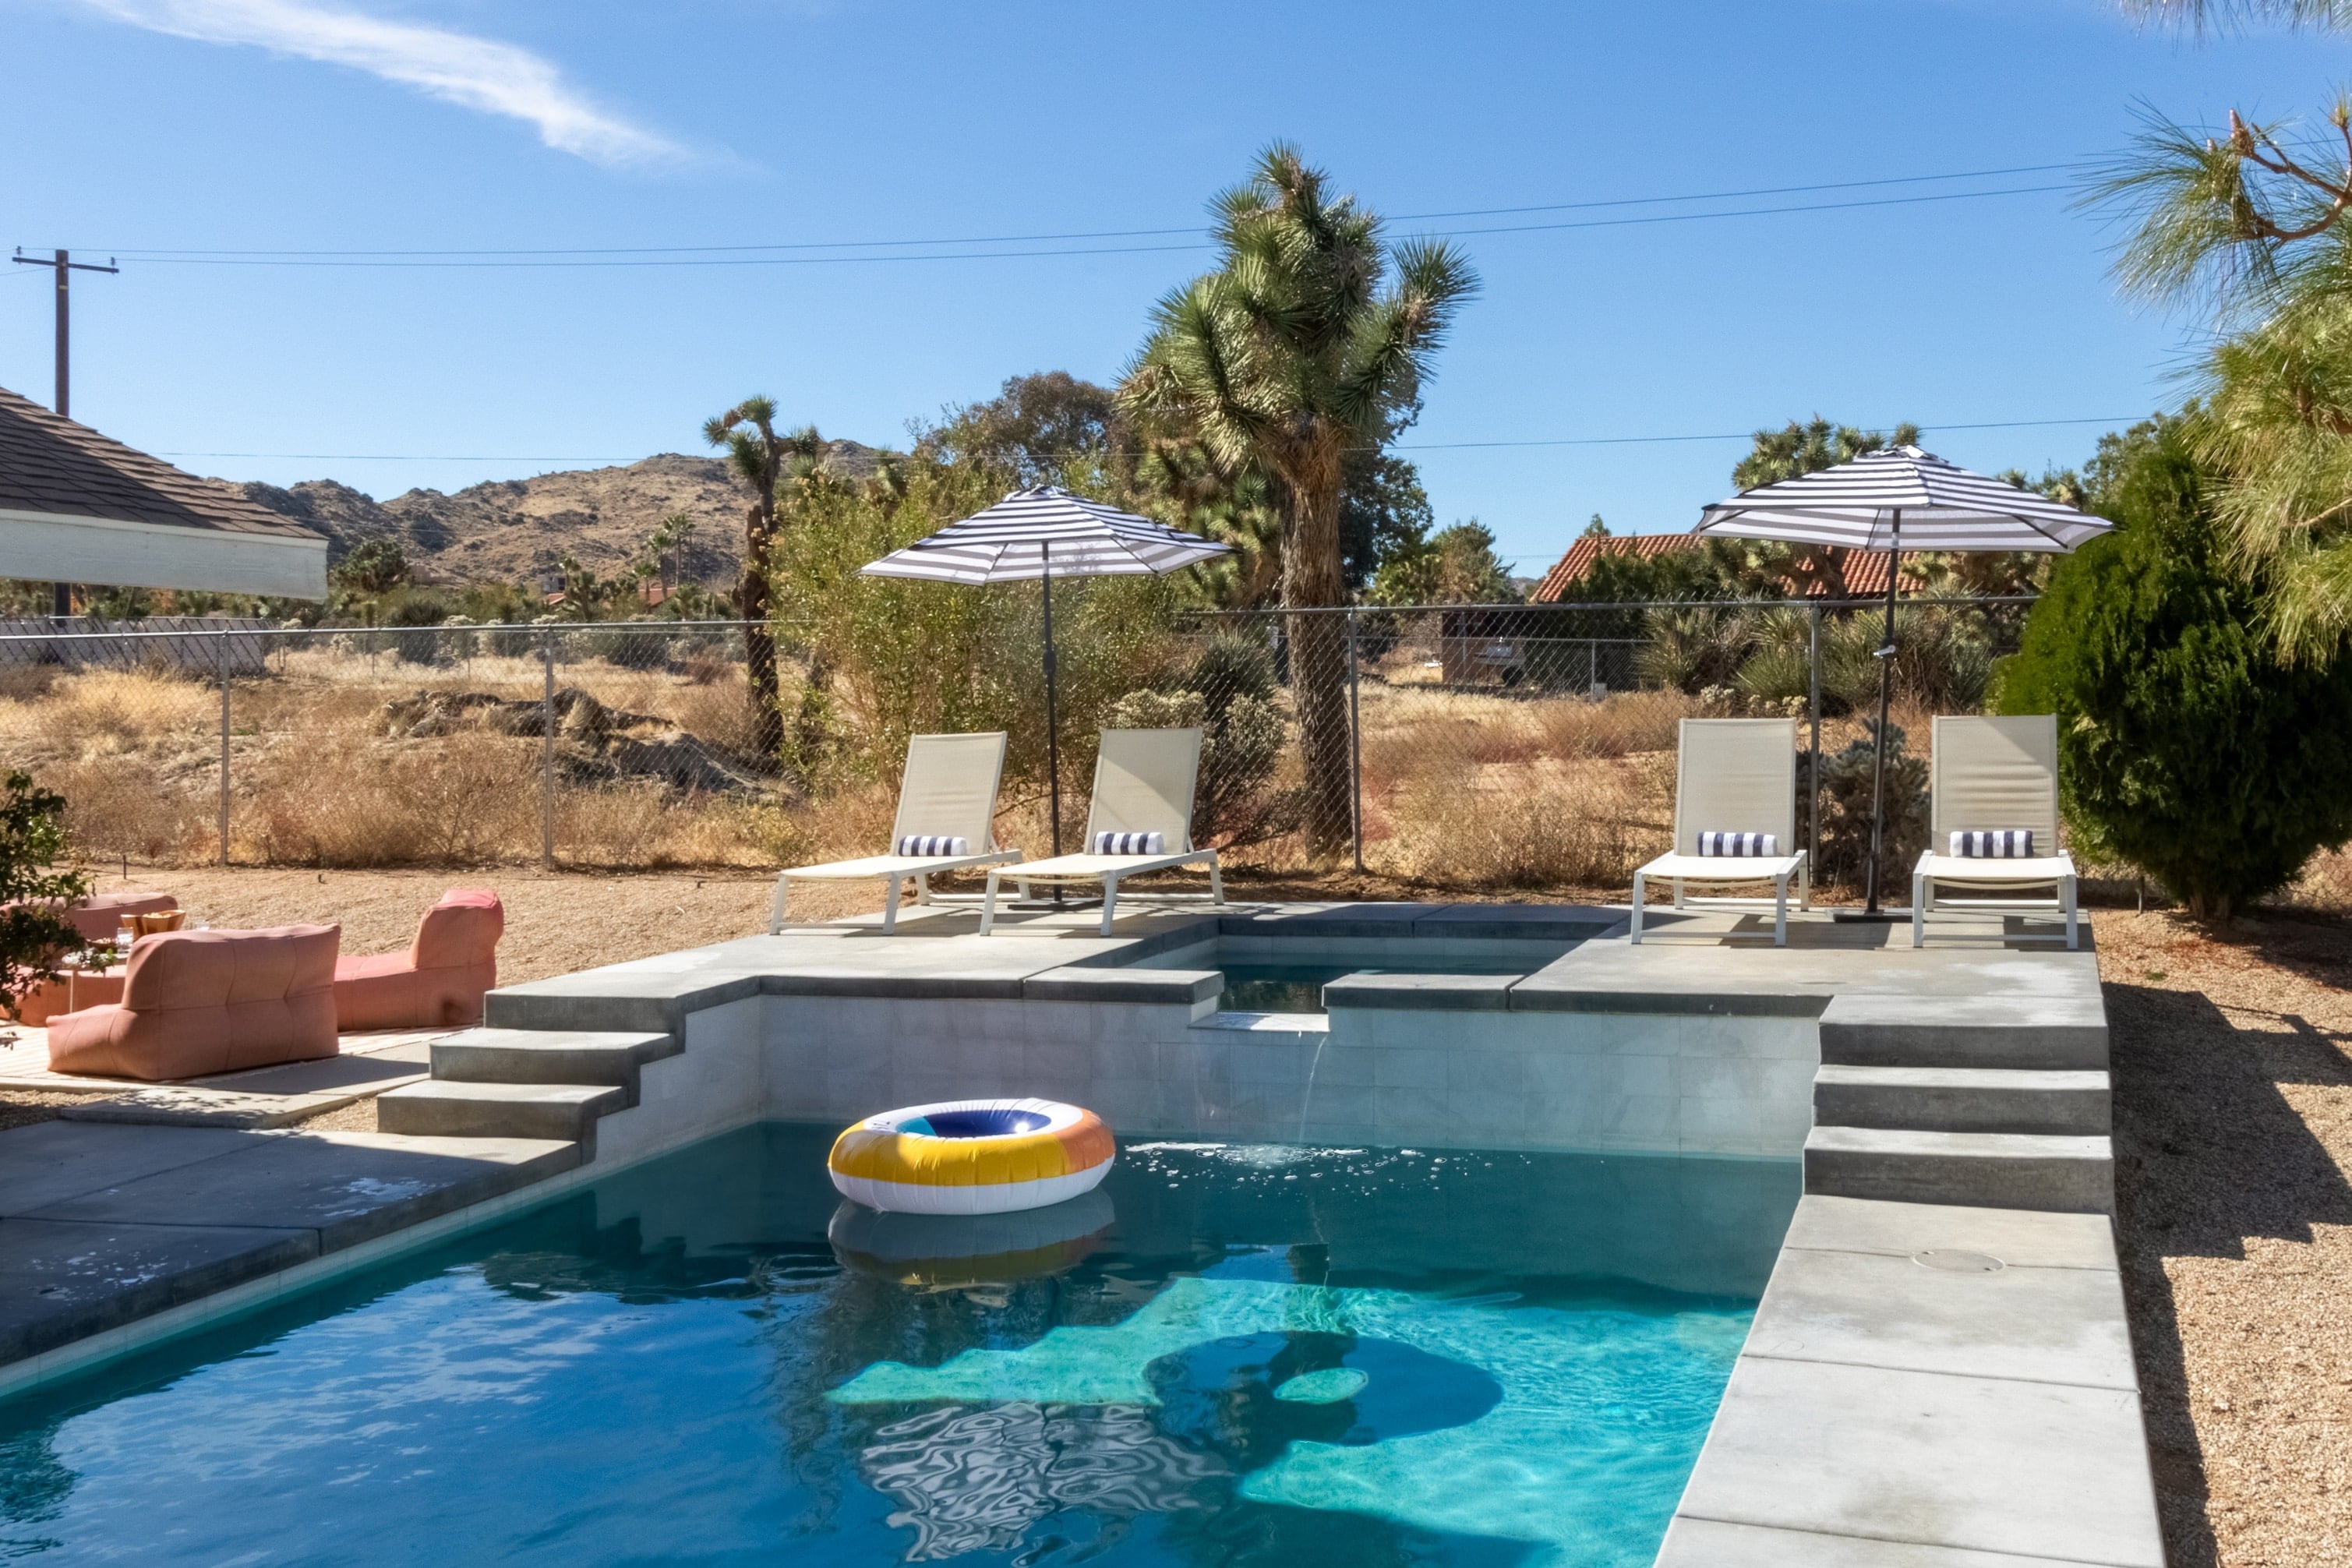 Stunning backyard with a private pool, hot tub, and plenty of loungers.